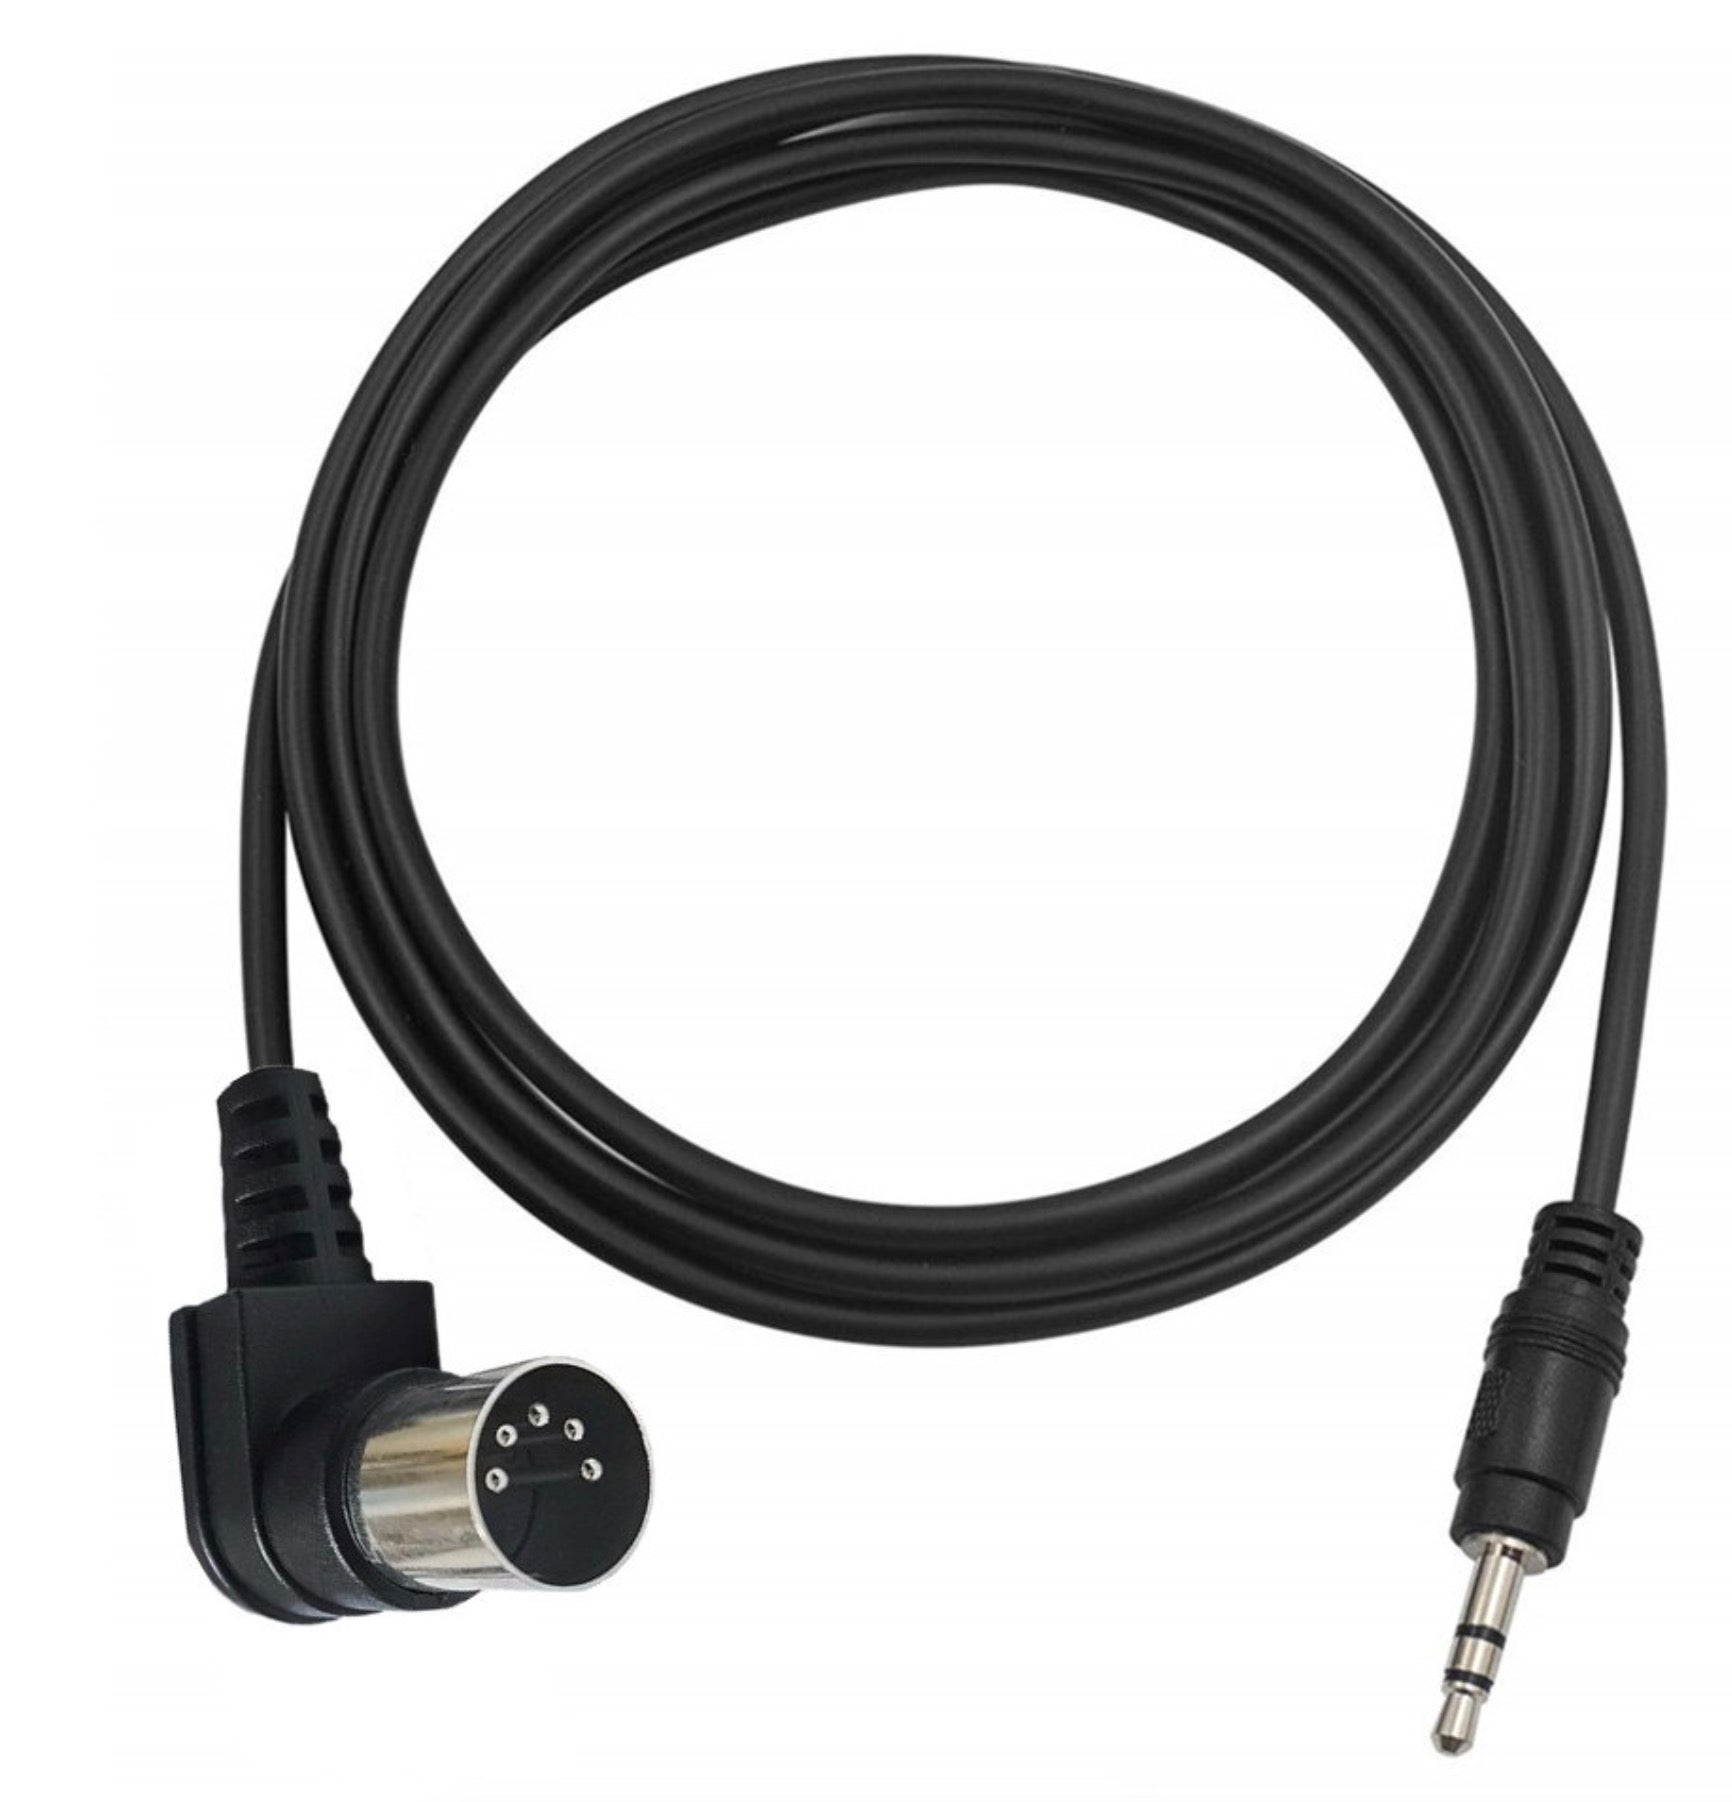 Angled 5-Pin Din Male to 3.5mm 1/8 inch TRS Male Jack Stereo Plug Converter Cable Audio Cable